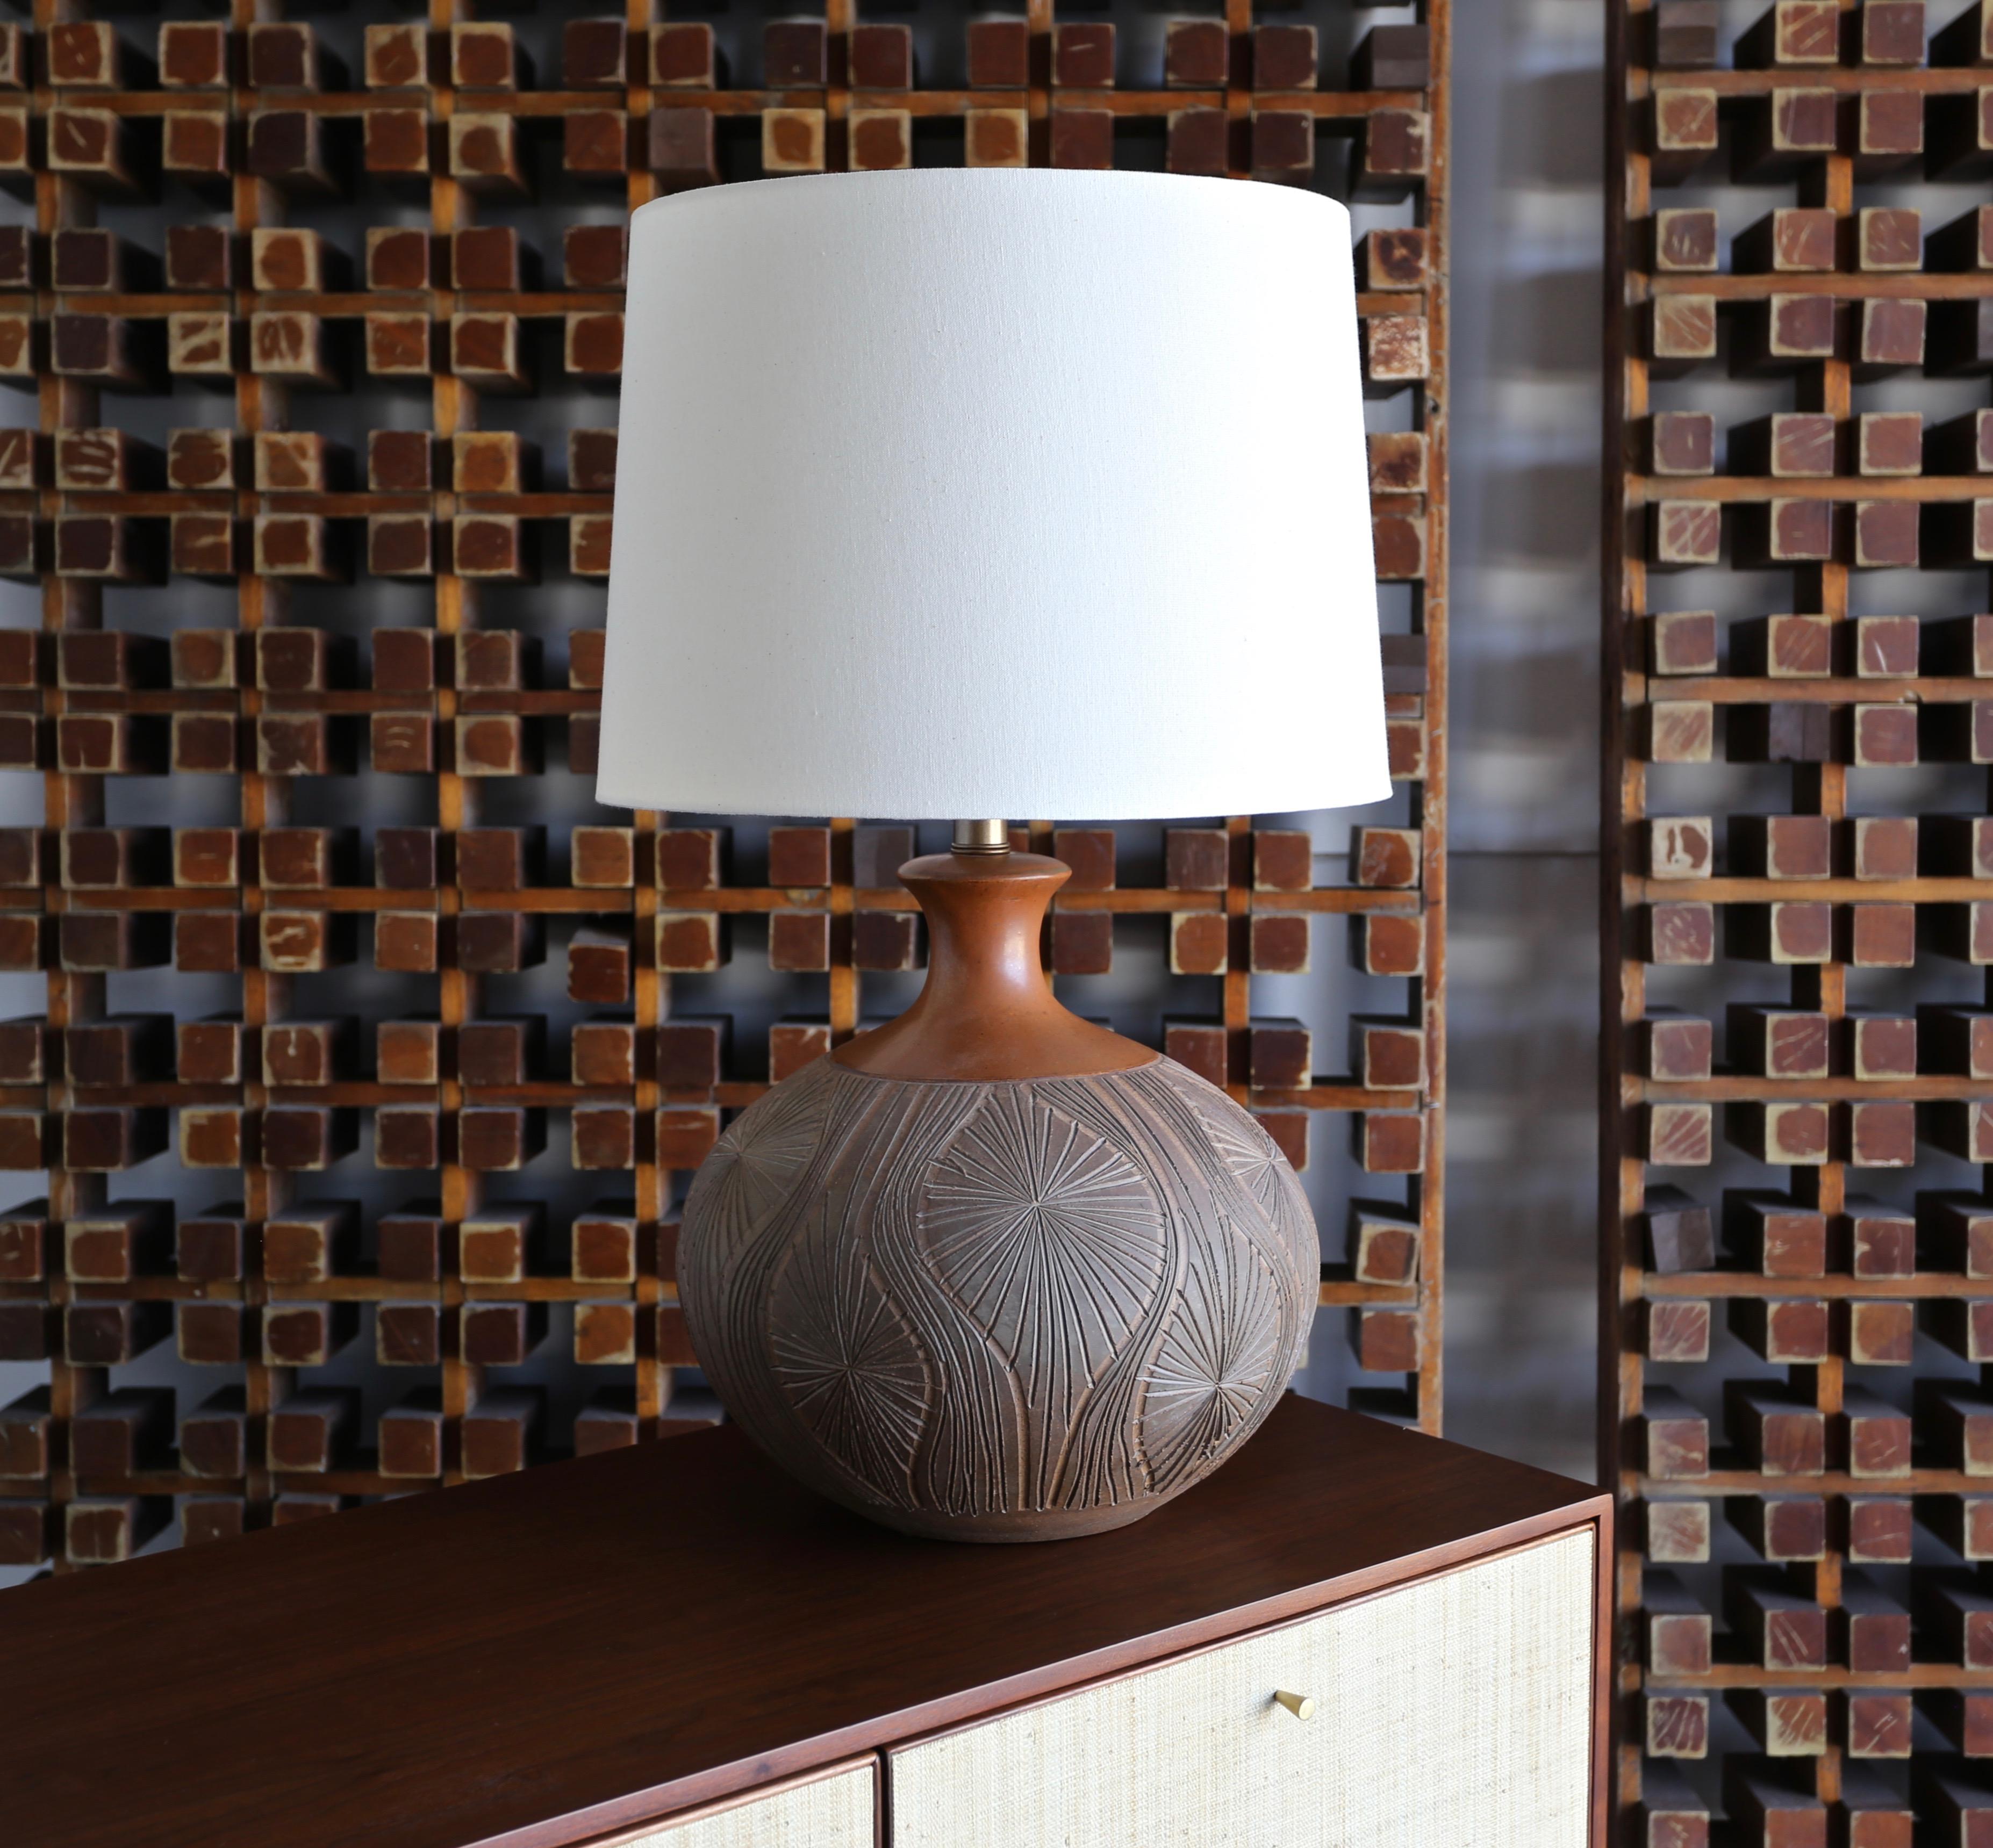 Pair of ceramic Earthgender table lamps by David Cressey Robert Maxwell. This pair has been professionally rewired. New shades. The listed measurements include the shades. This pair is a great example of California modern design circa 1970.